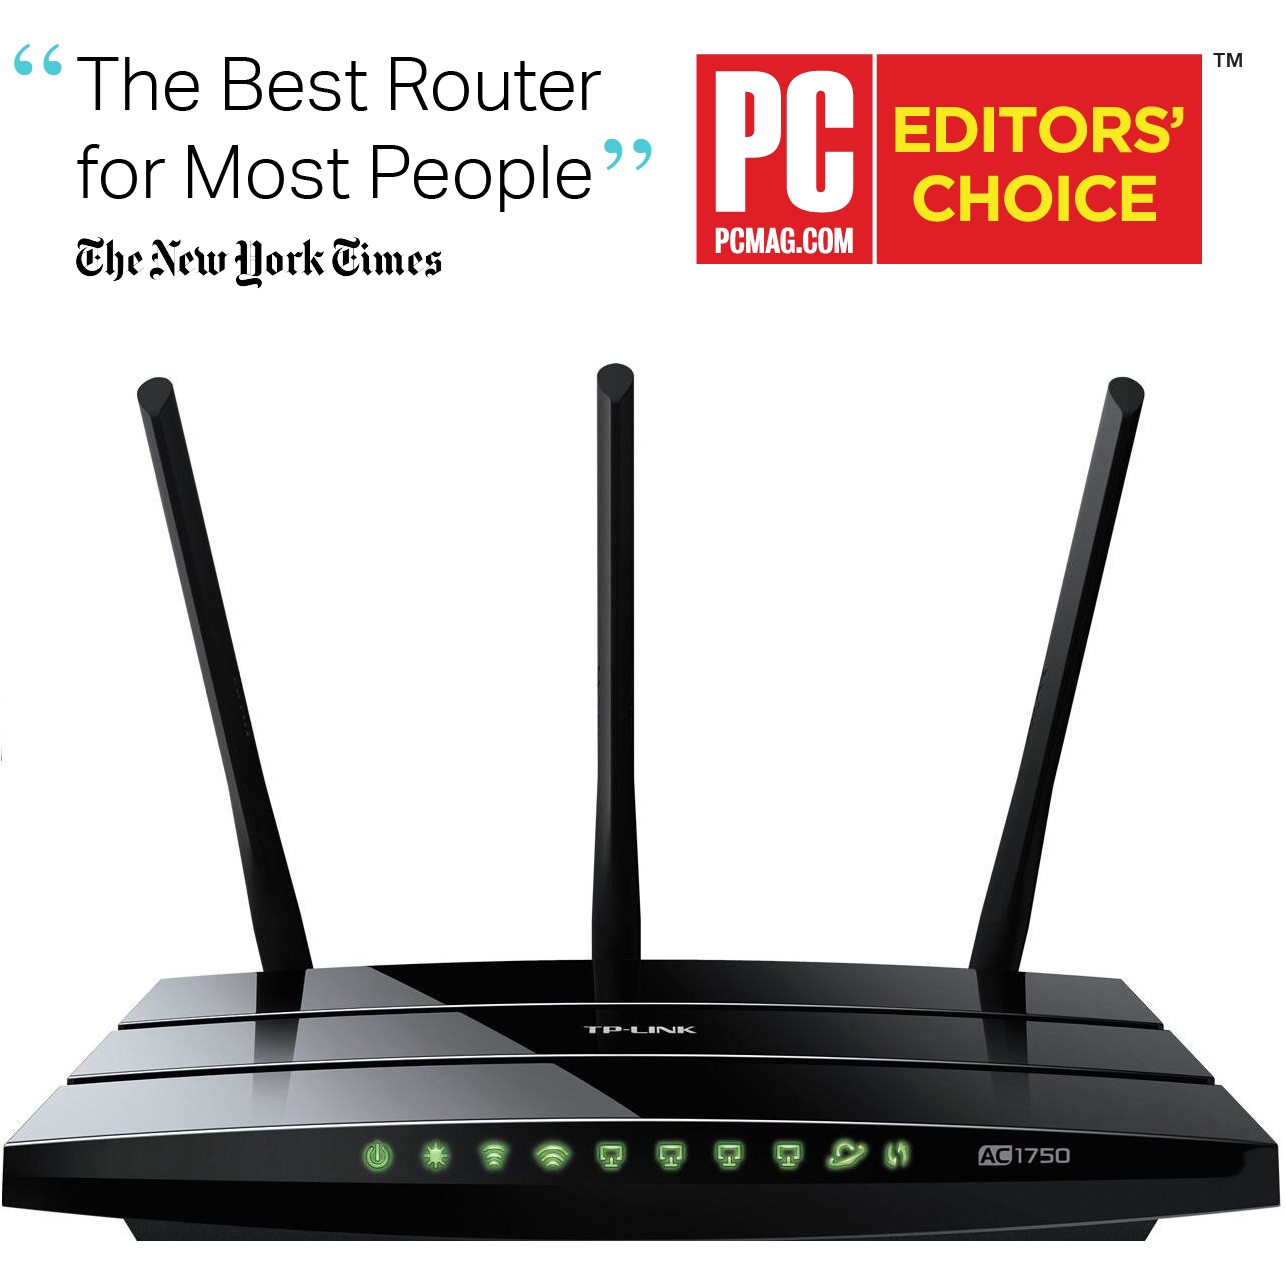 TP-LINK Archer C7 AC1750 Wireless Dual Band Gigabit Router - image 2 of 6